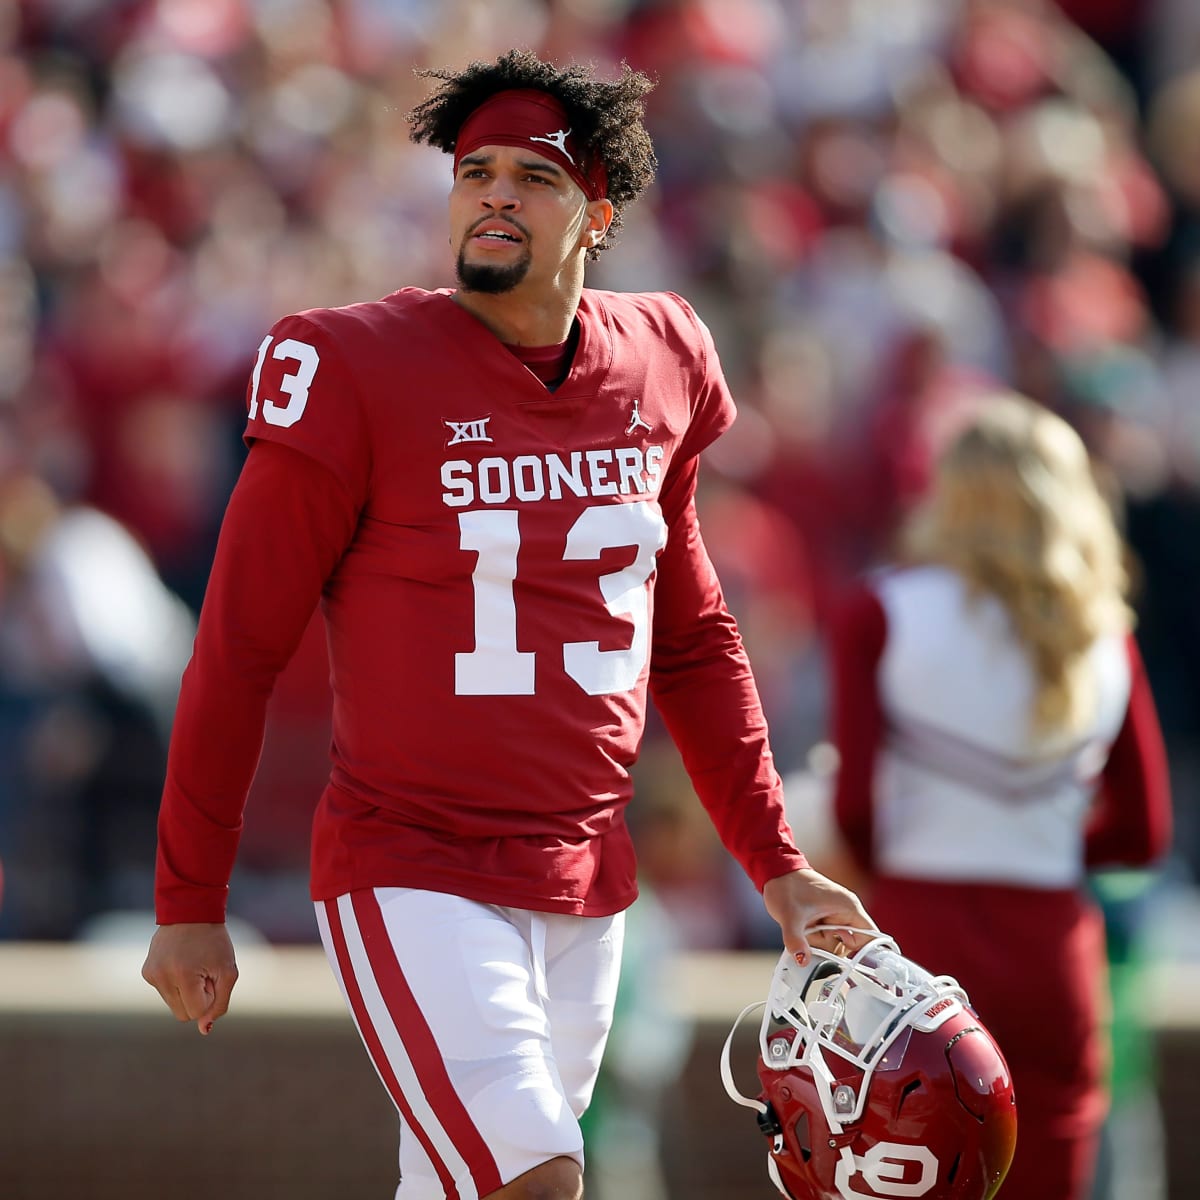 Fantasy Football: Devy Rankings Update 2021 Week 12 - Visit NFL Draft on  Sports Illustrated, the latest news coverage, with rankings for NFL Draft  prospects, College Football, Dynasty and Devy Fantasy Football.